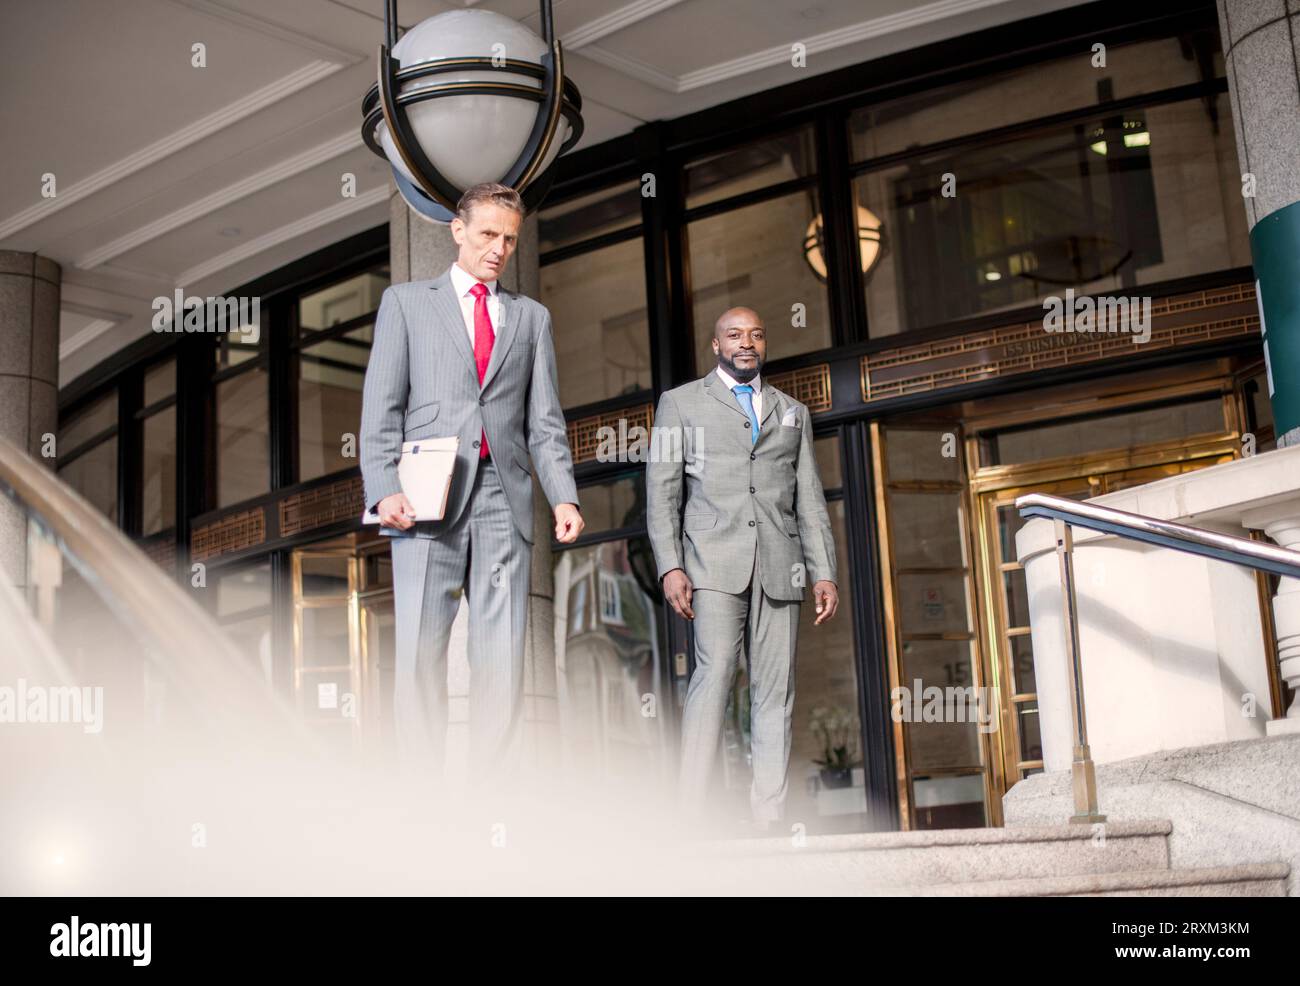 Businessmen wearing suits outside building Stock Photo